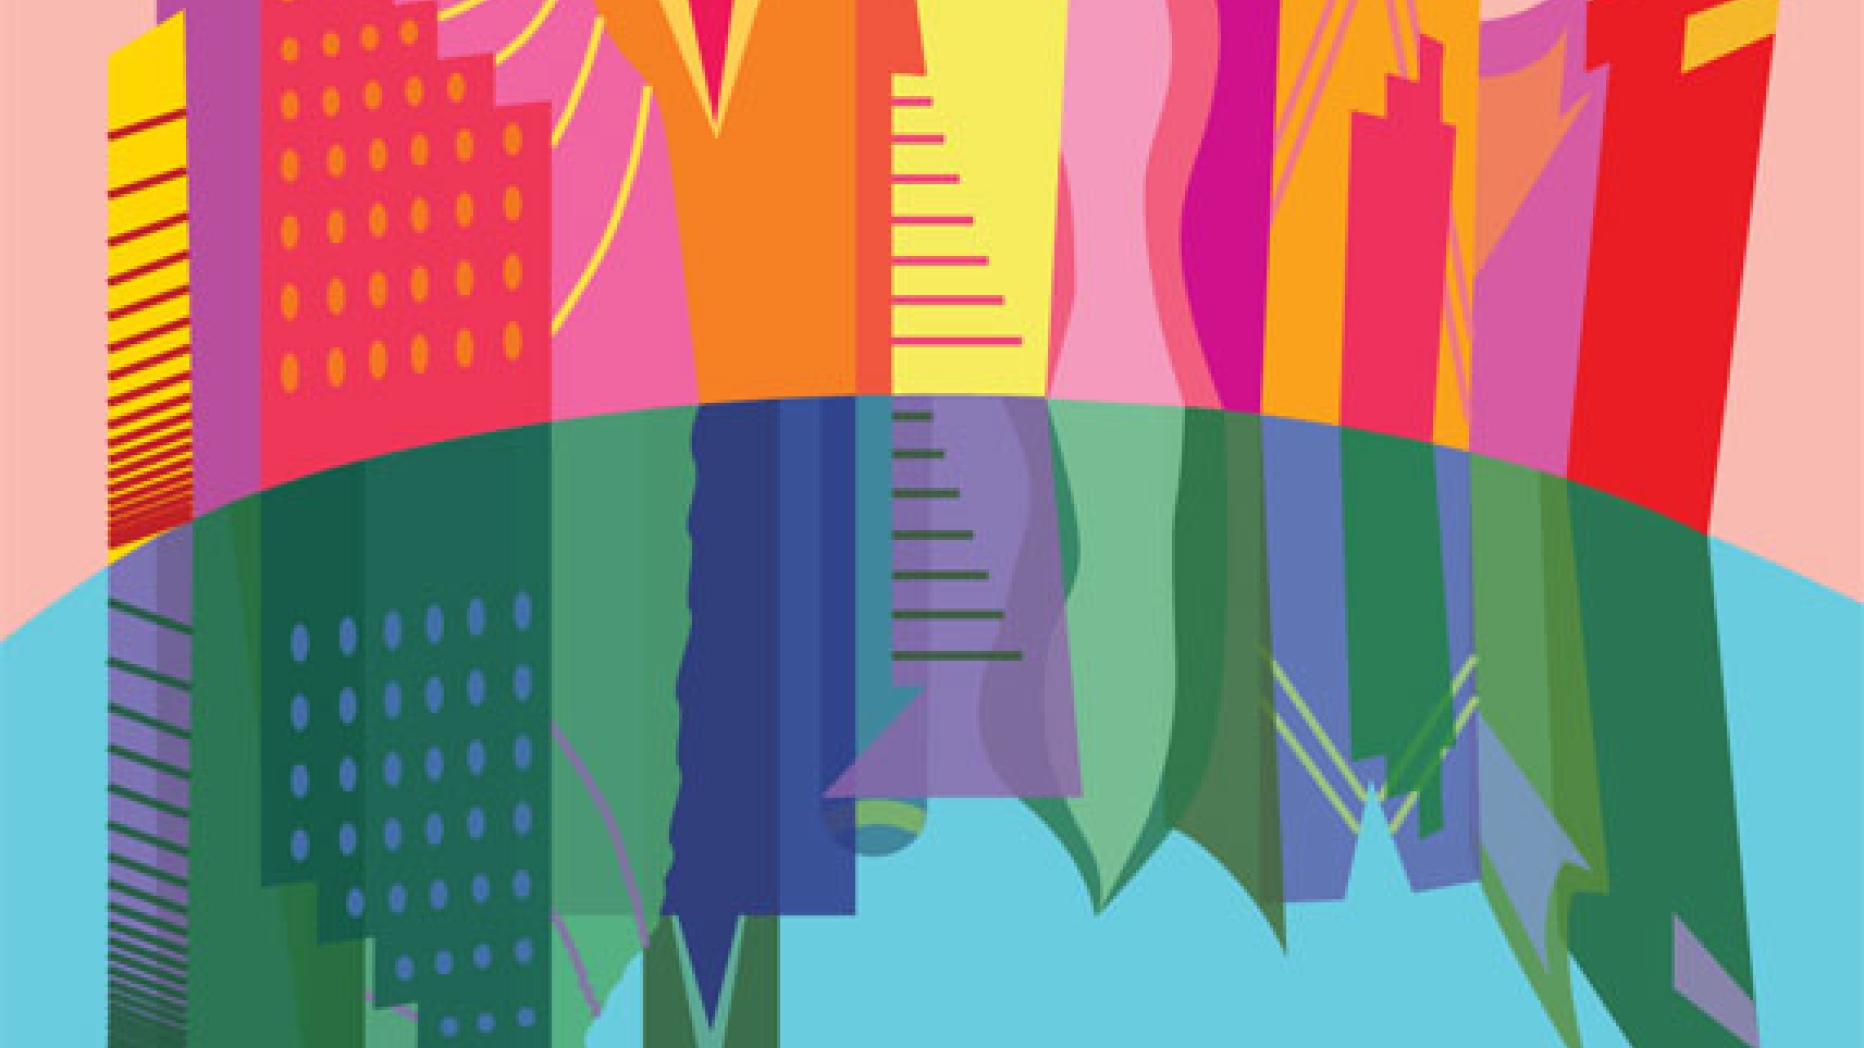 Stylized city skyline where all of the building are cartoonishly colored in pink, yellow, red and orange. Below the skyline is flipped image of the skyline where all of the colors of the buildings are the complementary opposite of what they are above.